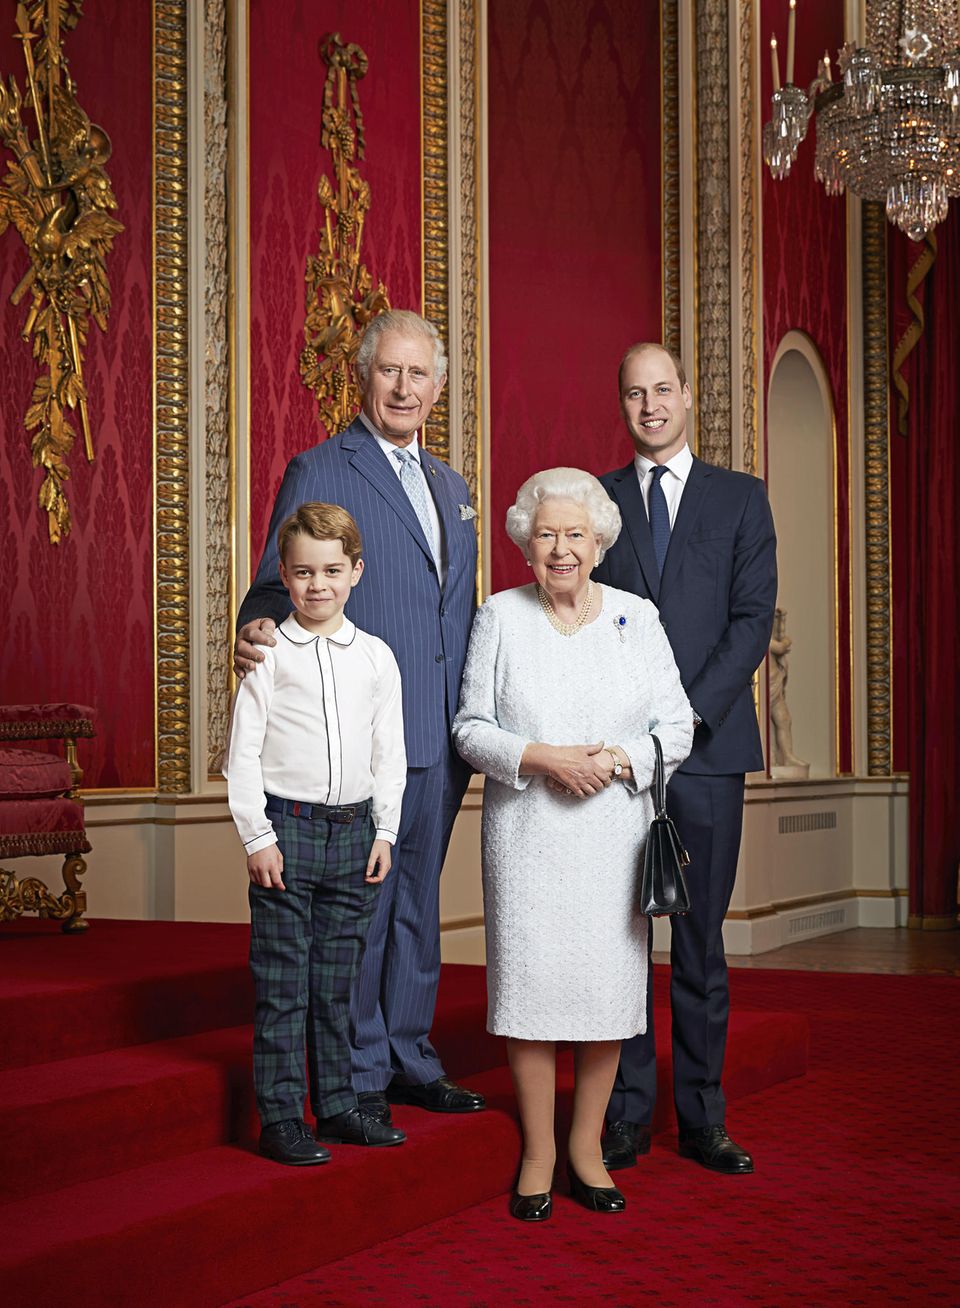 In 2020, Queen Elizabeth (†) posed with Prince George, King Charles (then Prince Charles) and Prince William in the Throne Room of Buckingham Palace.